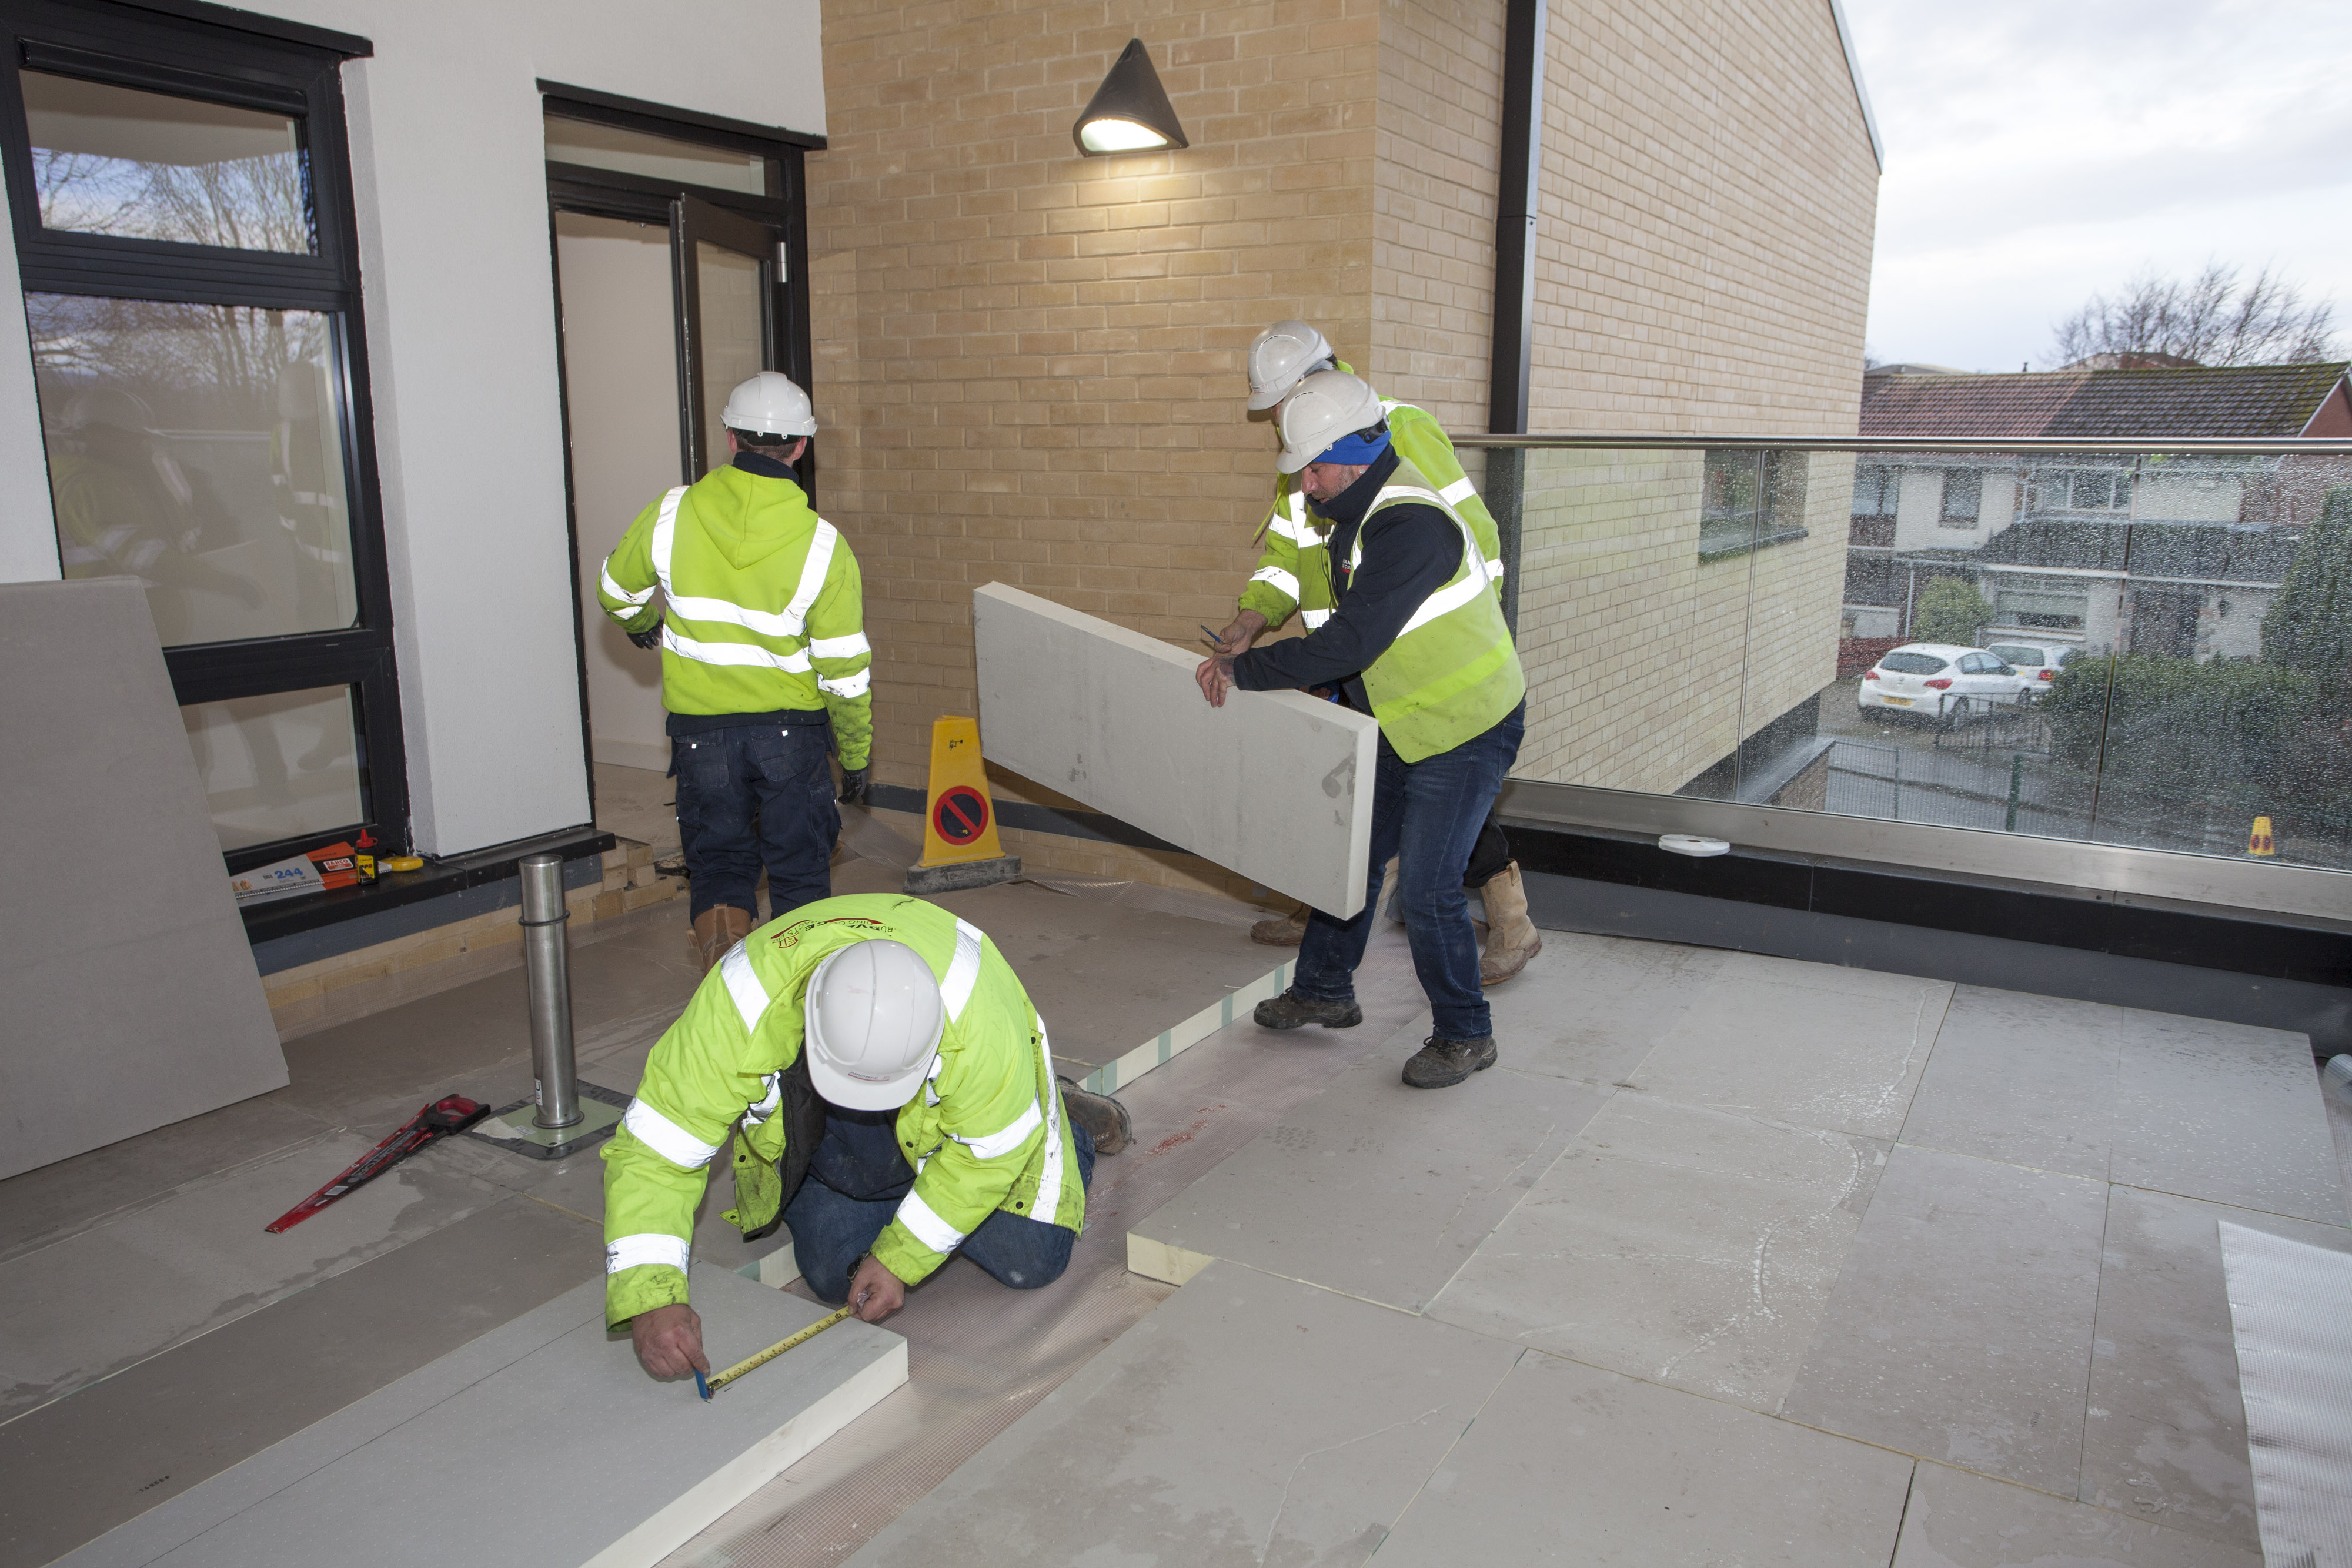 Scottish school uses insulating roofing system